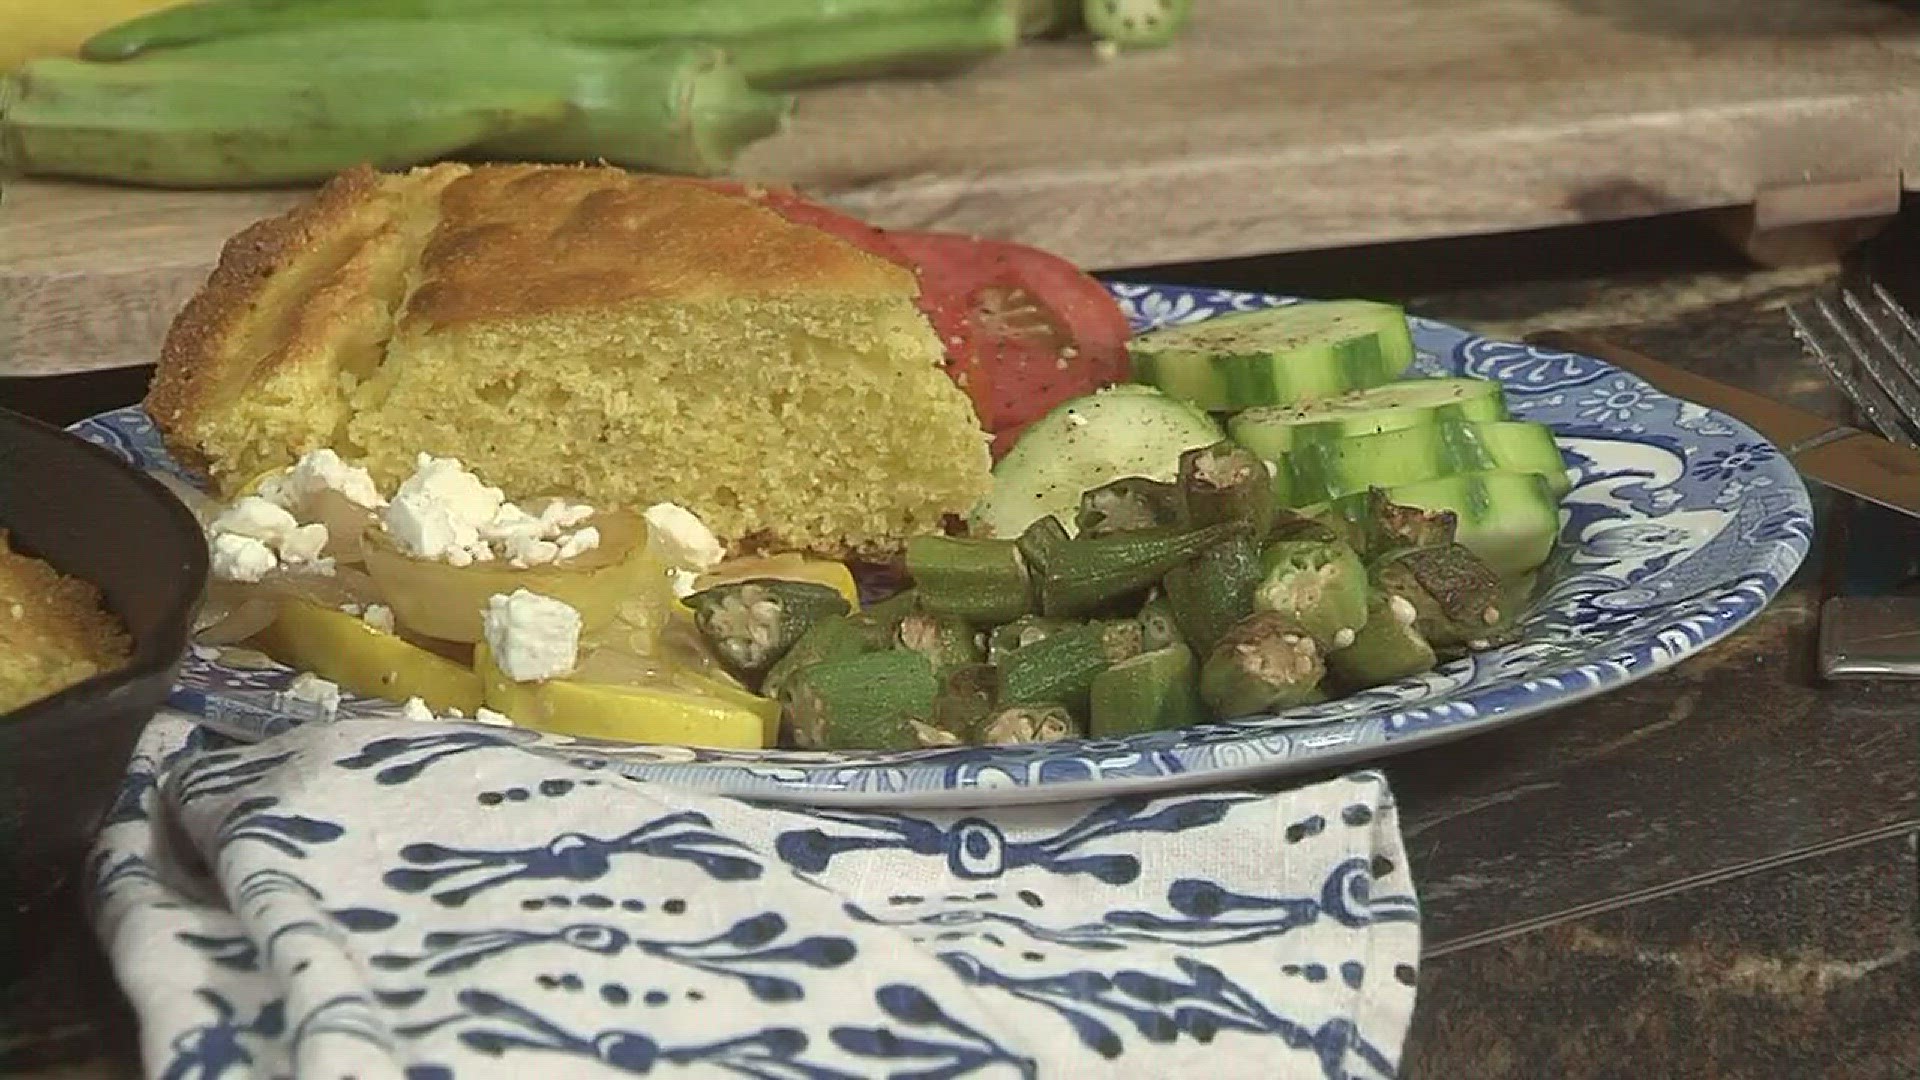 Joy McCabe shares a recipe using fresh vegetables. Joy is teaching a tailgating cooking class at the Glass Bazaar on Aug. 7, 2017. You can sign up by calling 865-584-9072. You can find more of Joy's recipes at joymccabe.comAugust 1, 2017, 4pm